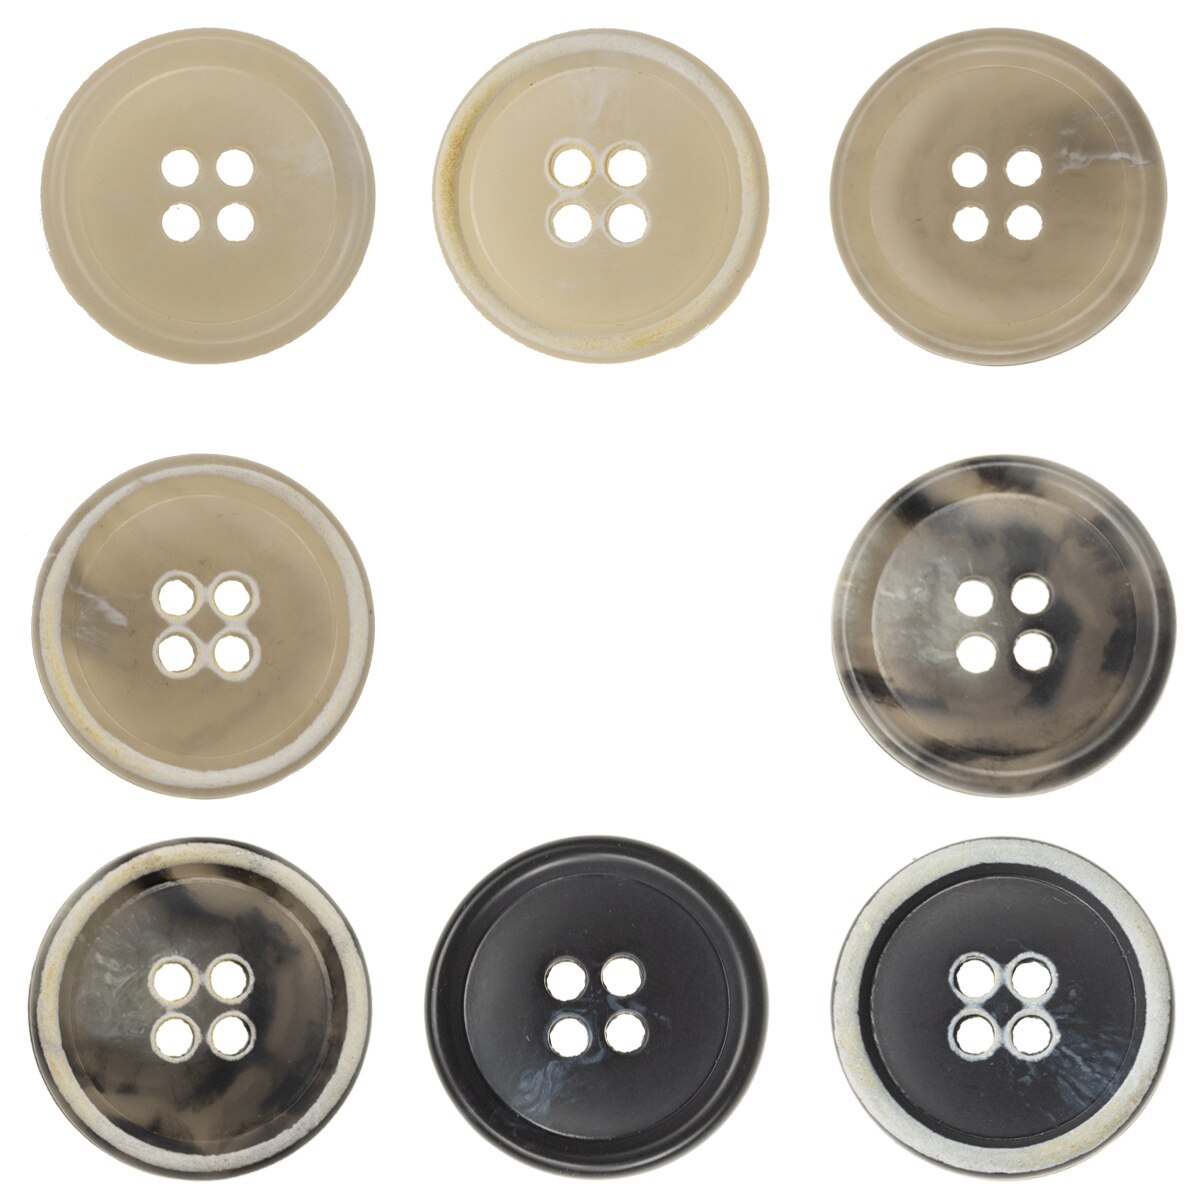 10pcs Round Urea Buttons 4 Hole For Casual Jacket Sweater Shirts Formal Suit Burnt Edge Buttons